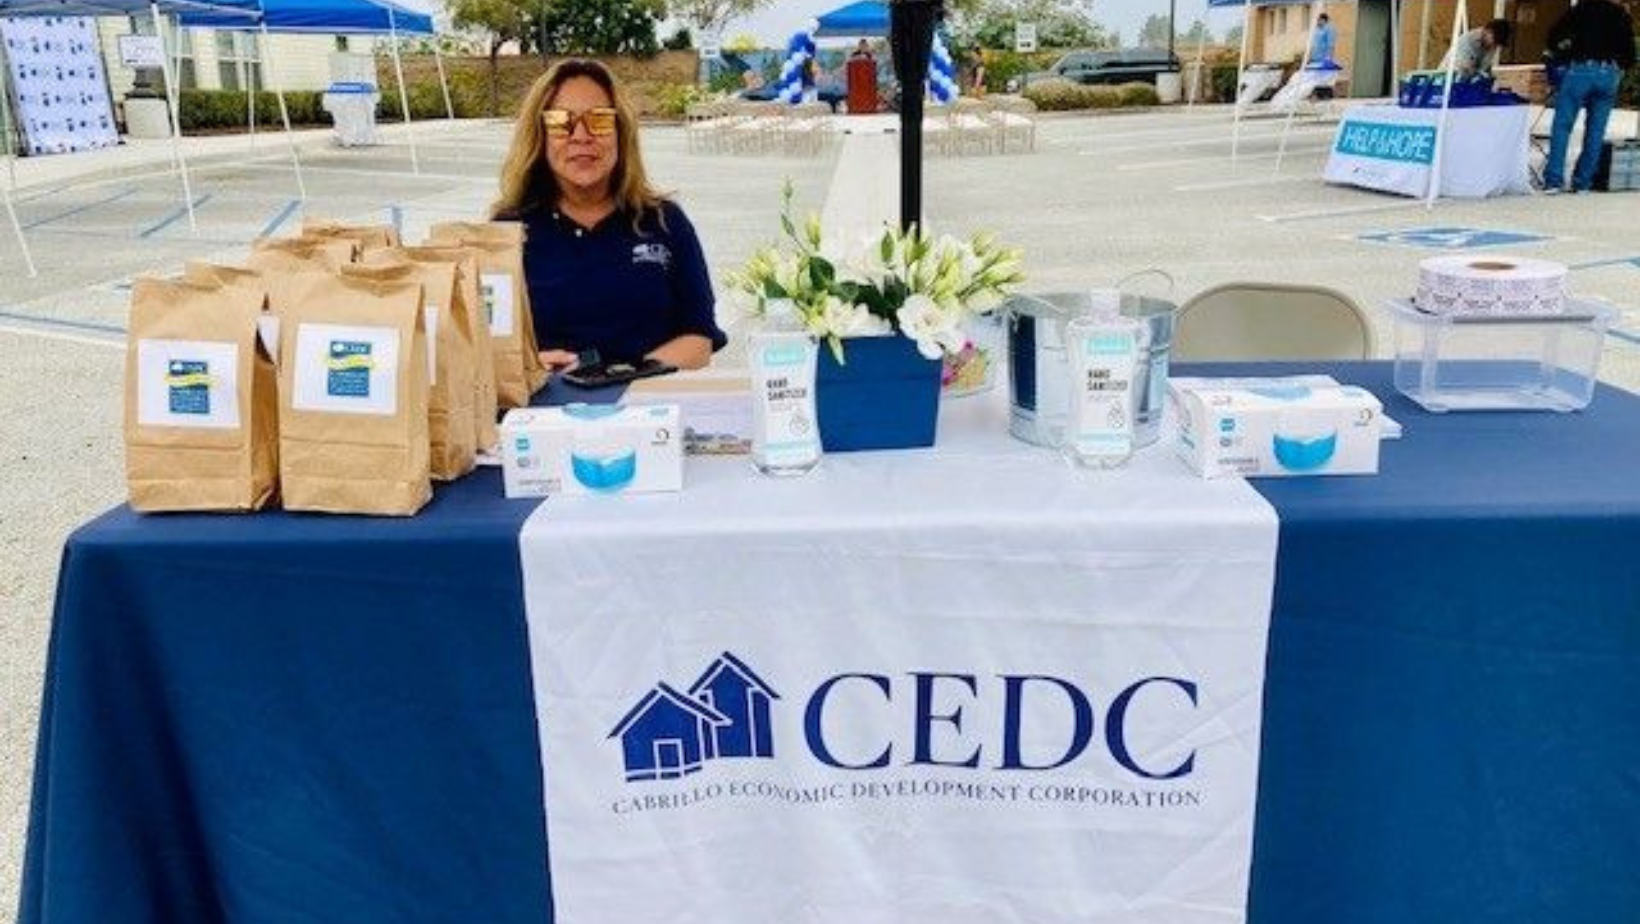 CEDC staff at an informational table